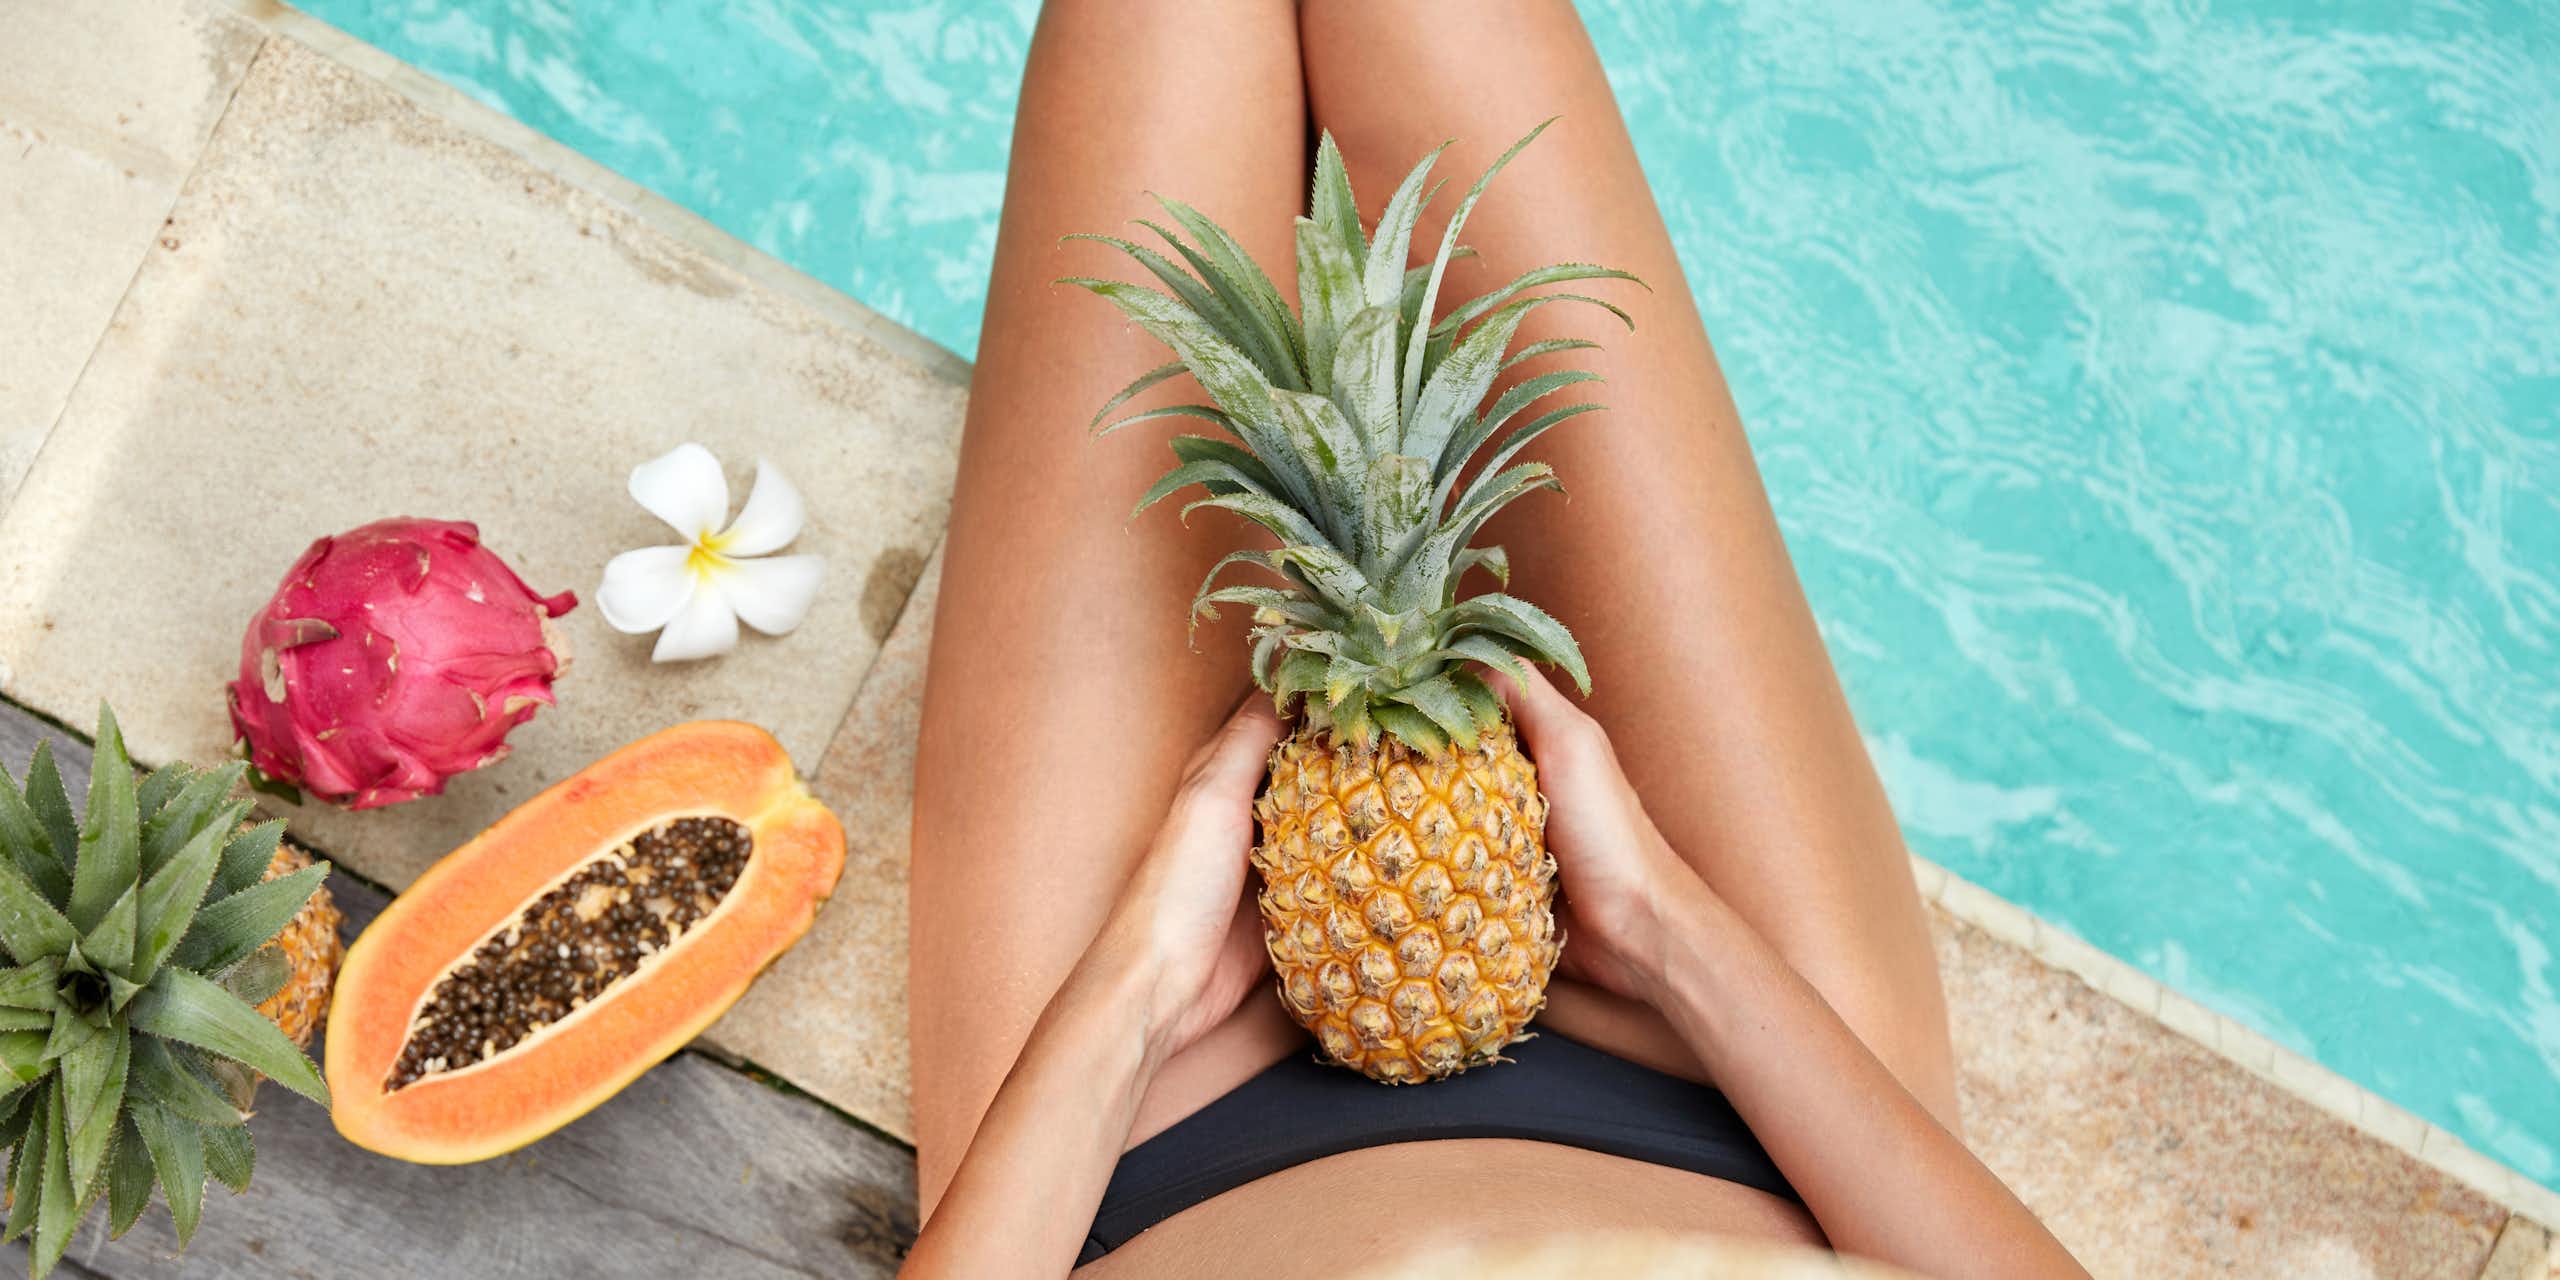 Woman in a bikini, sitting next to a pool, holding a pineapple on her lap